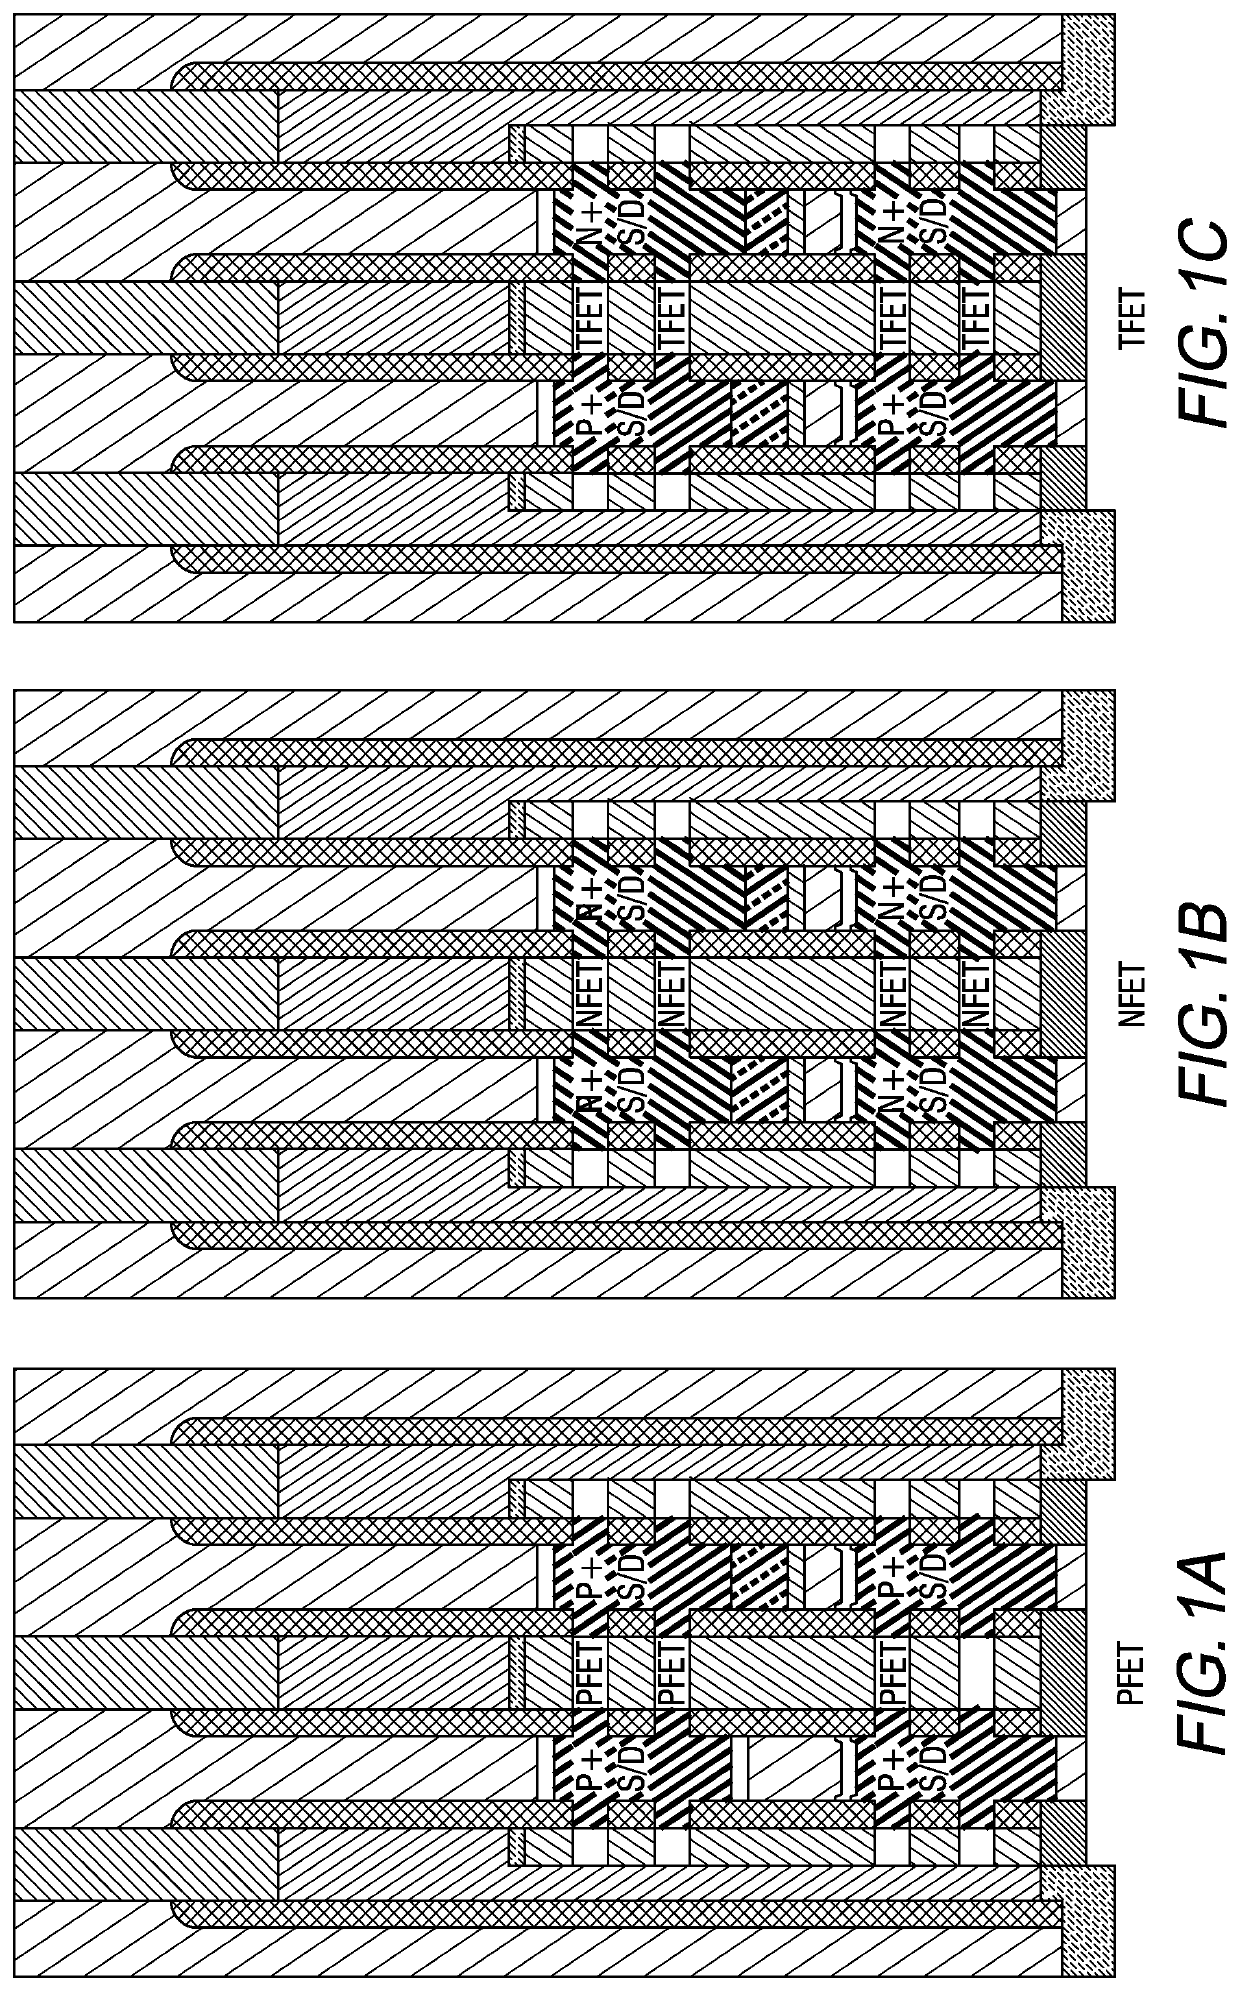 Multiple NANO layer transistor layers with different transistor architectures for improved circuit layout and performance